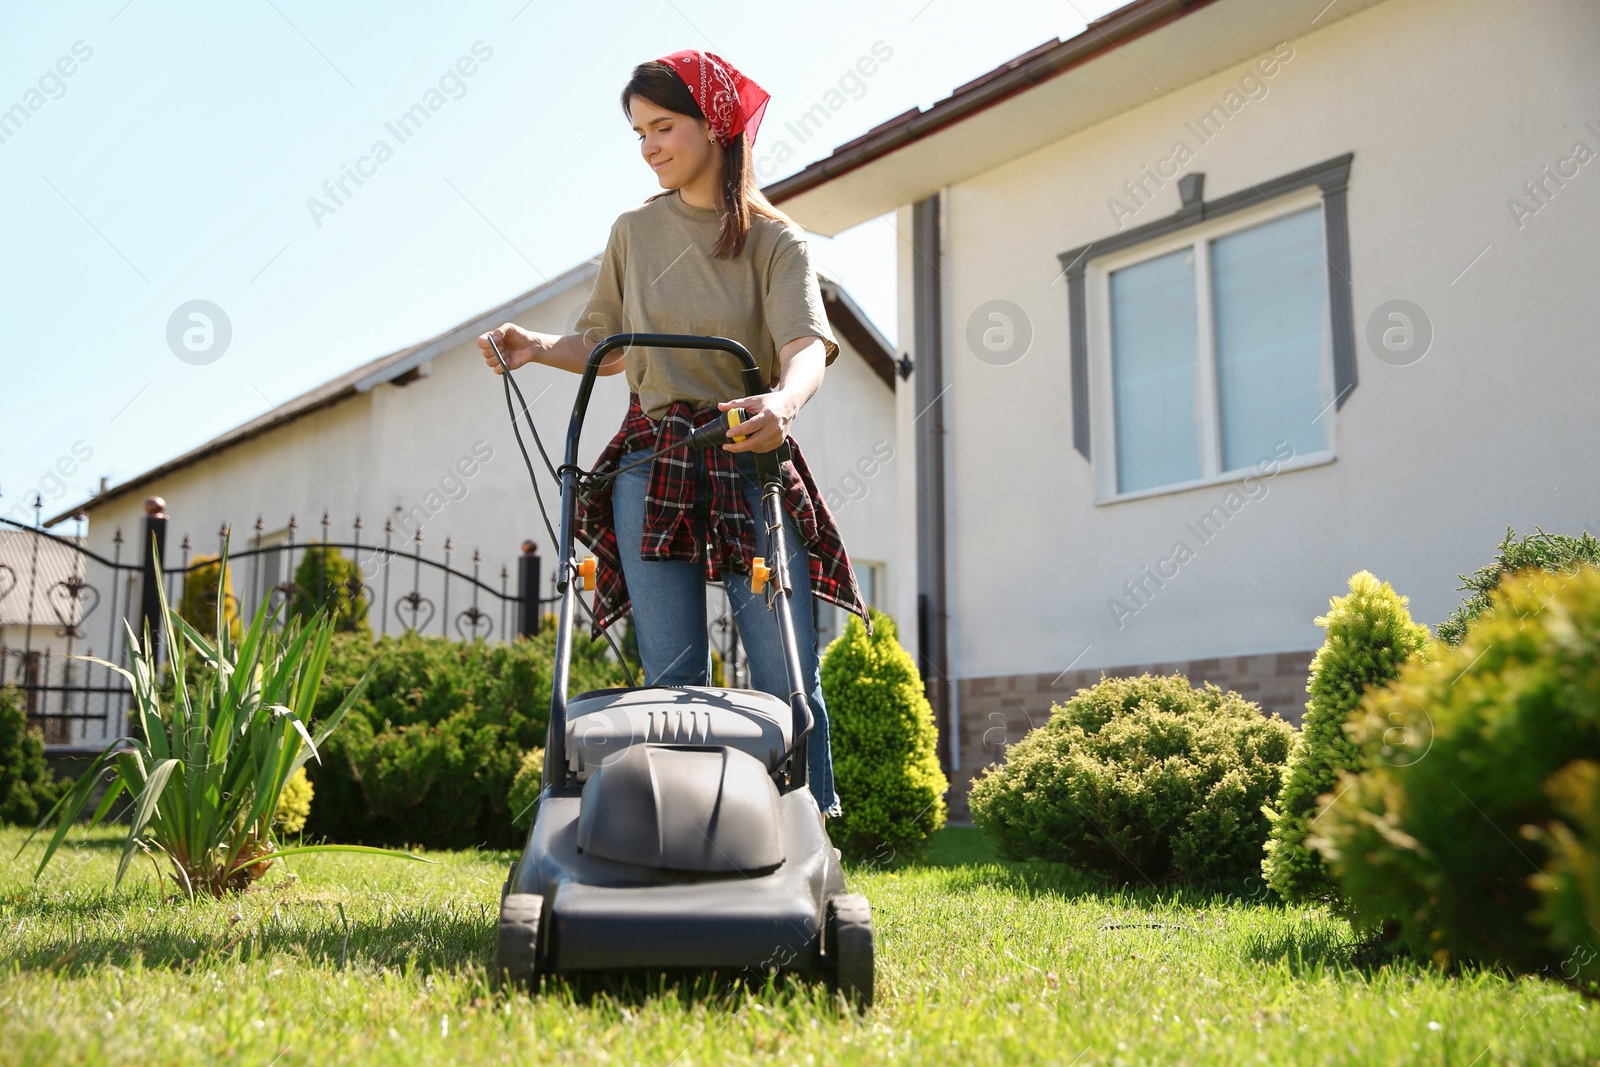 Photo of Smiling woman with modern lawn mower in garden